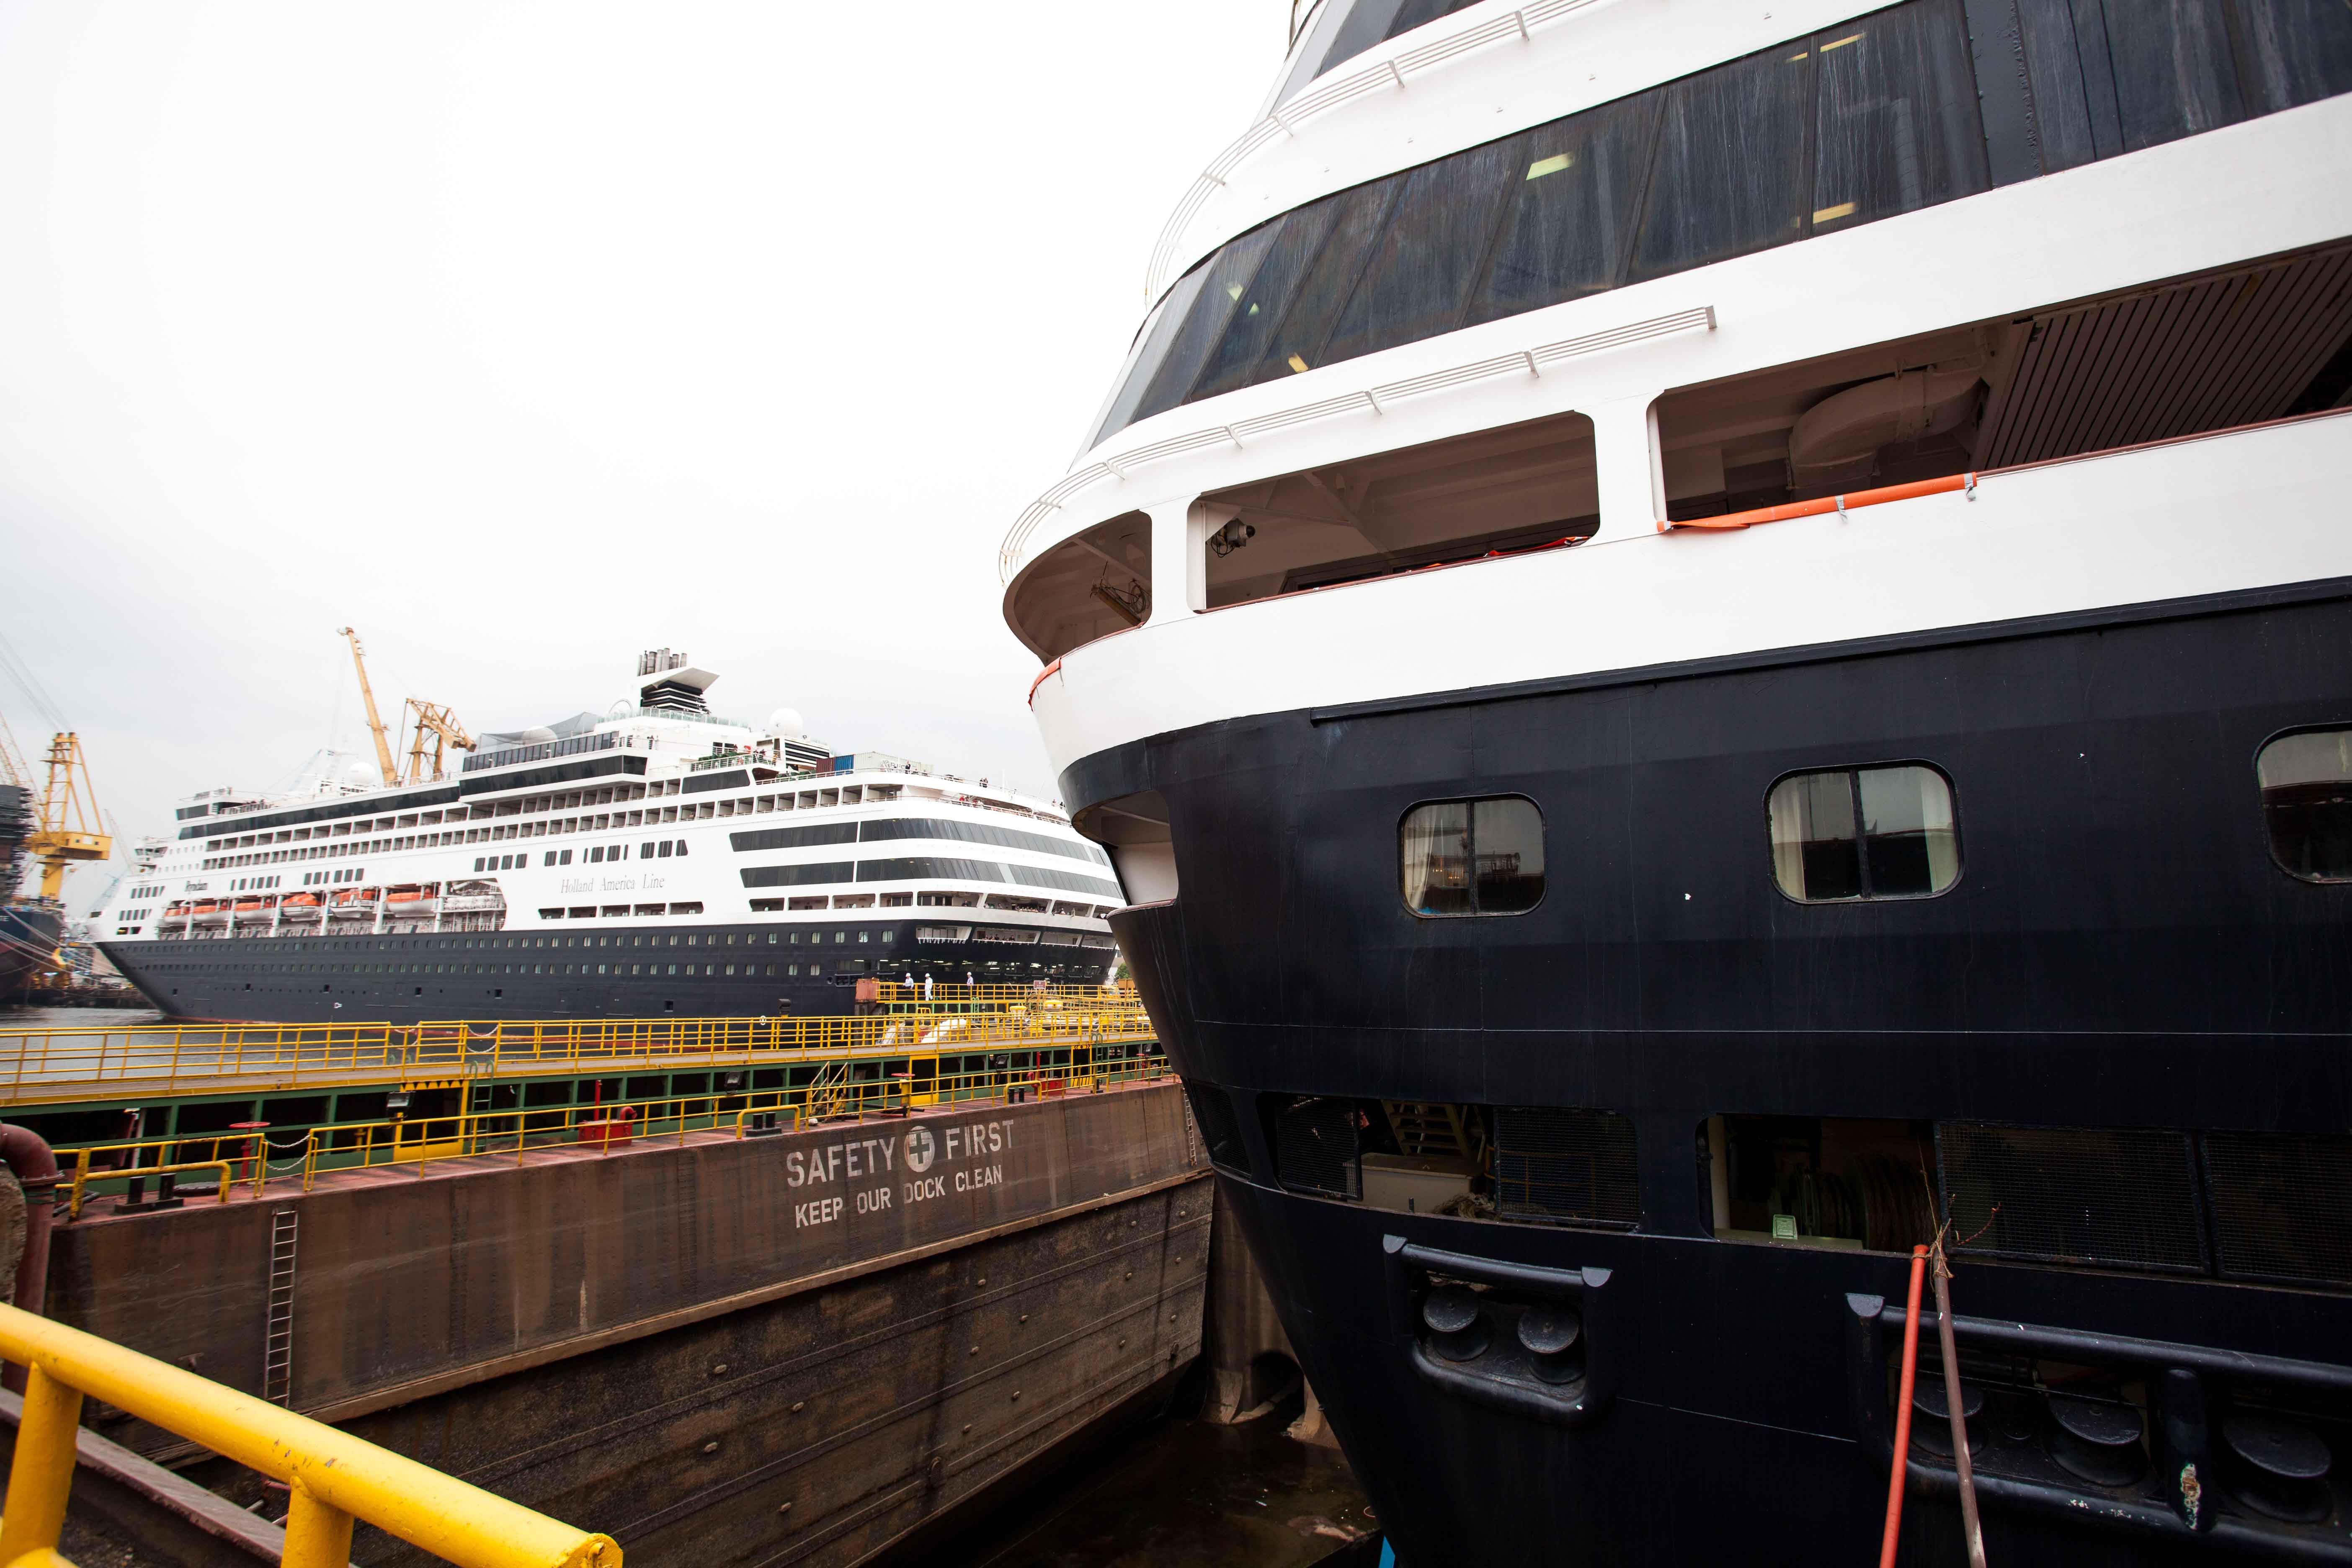 Pacific Aria and Pacific Eden meet in dry dock